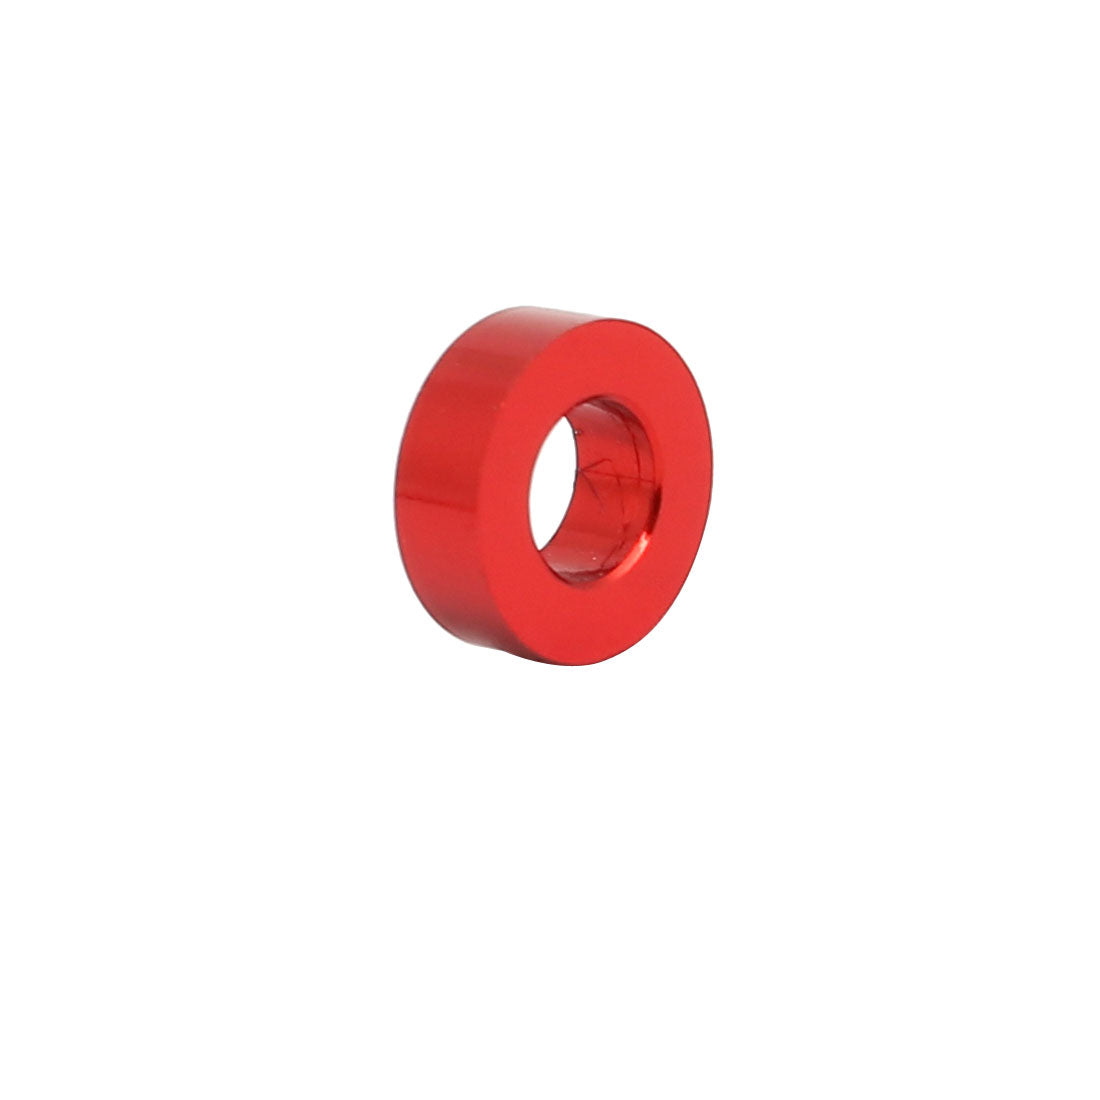 uxcell Uxcell 10pcs 2mm Thickness M3 Aluminum Alloy Flat Fender Screw Washer Red